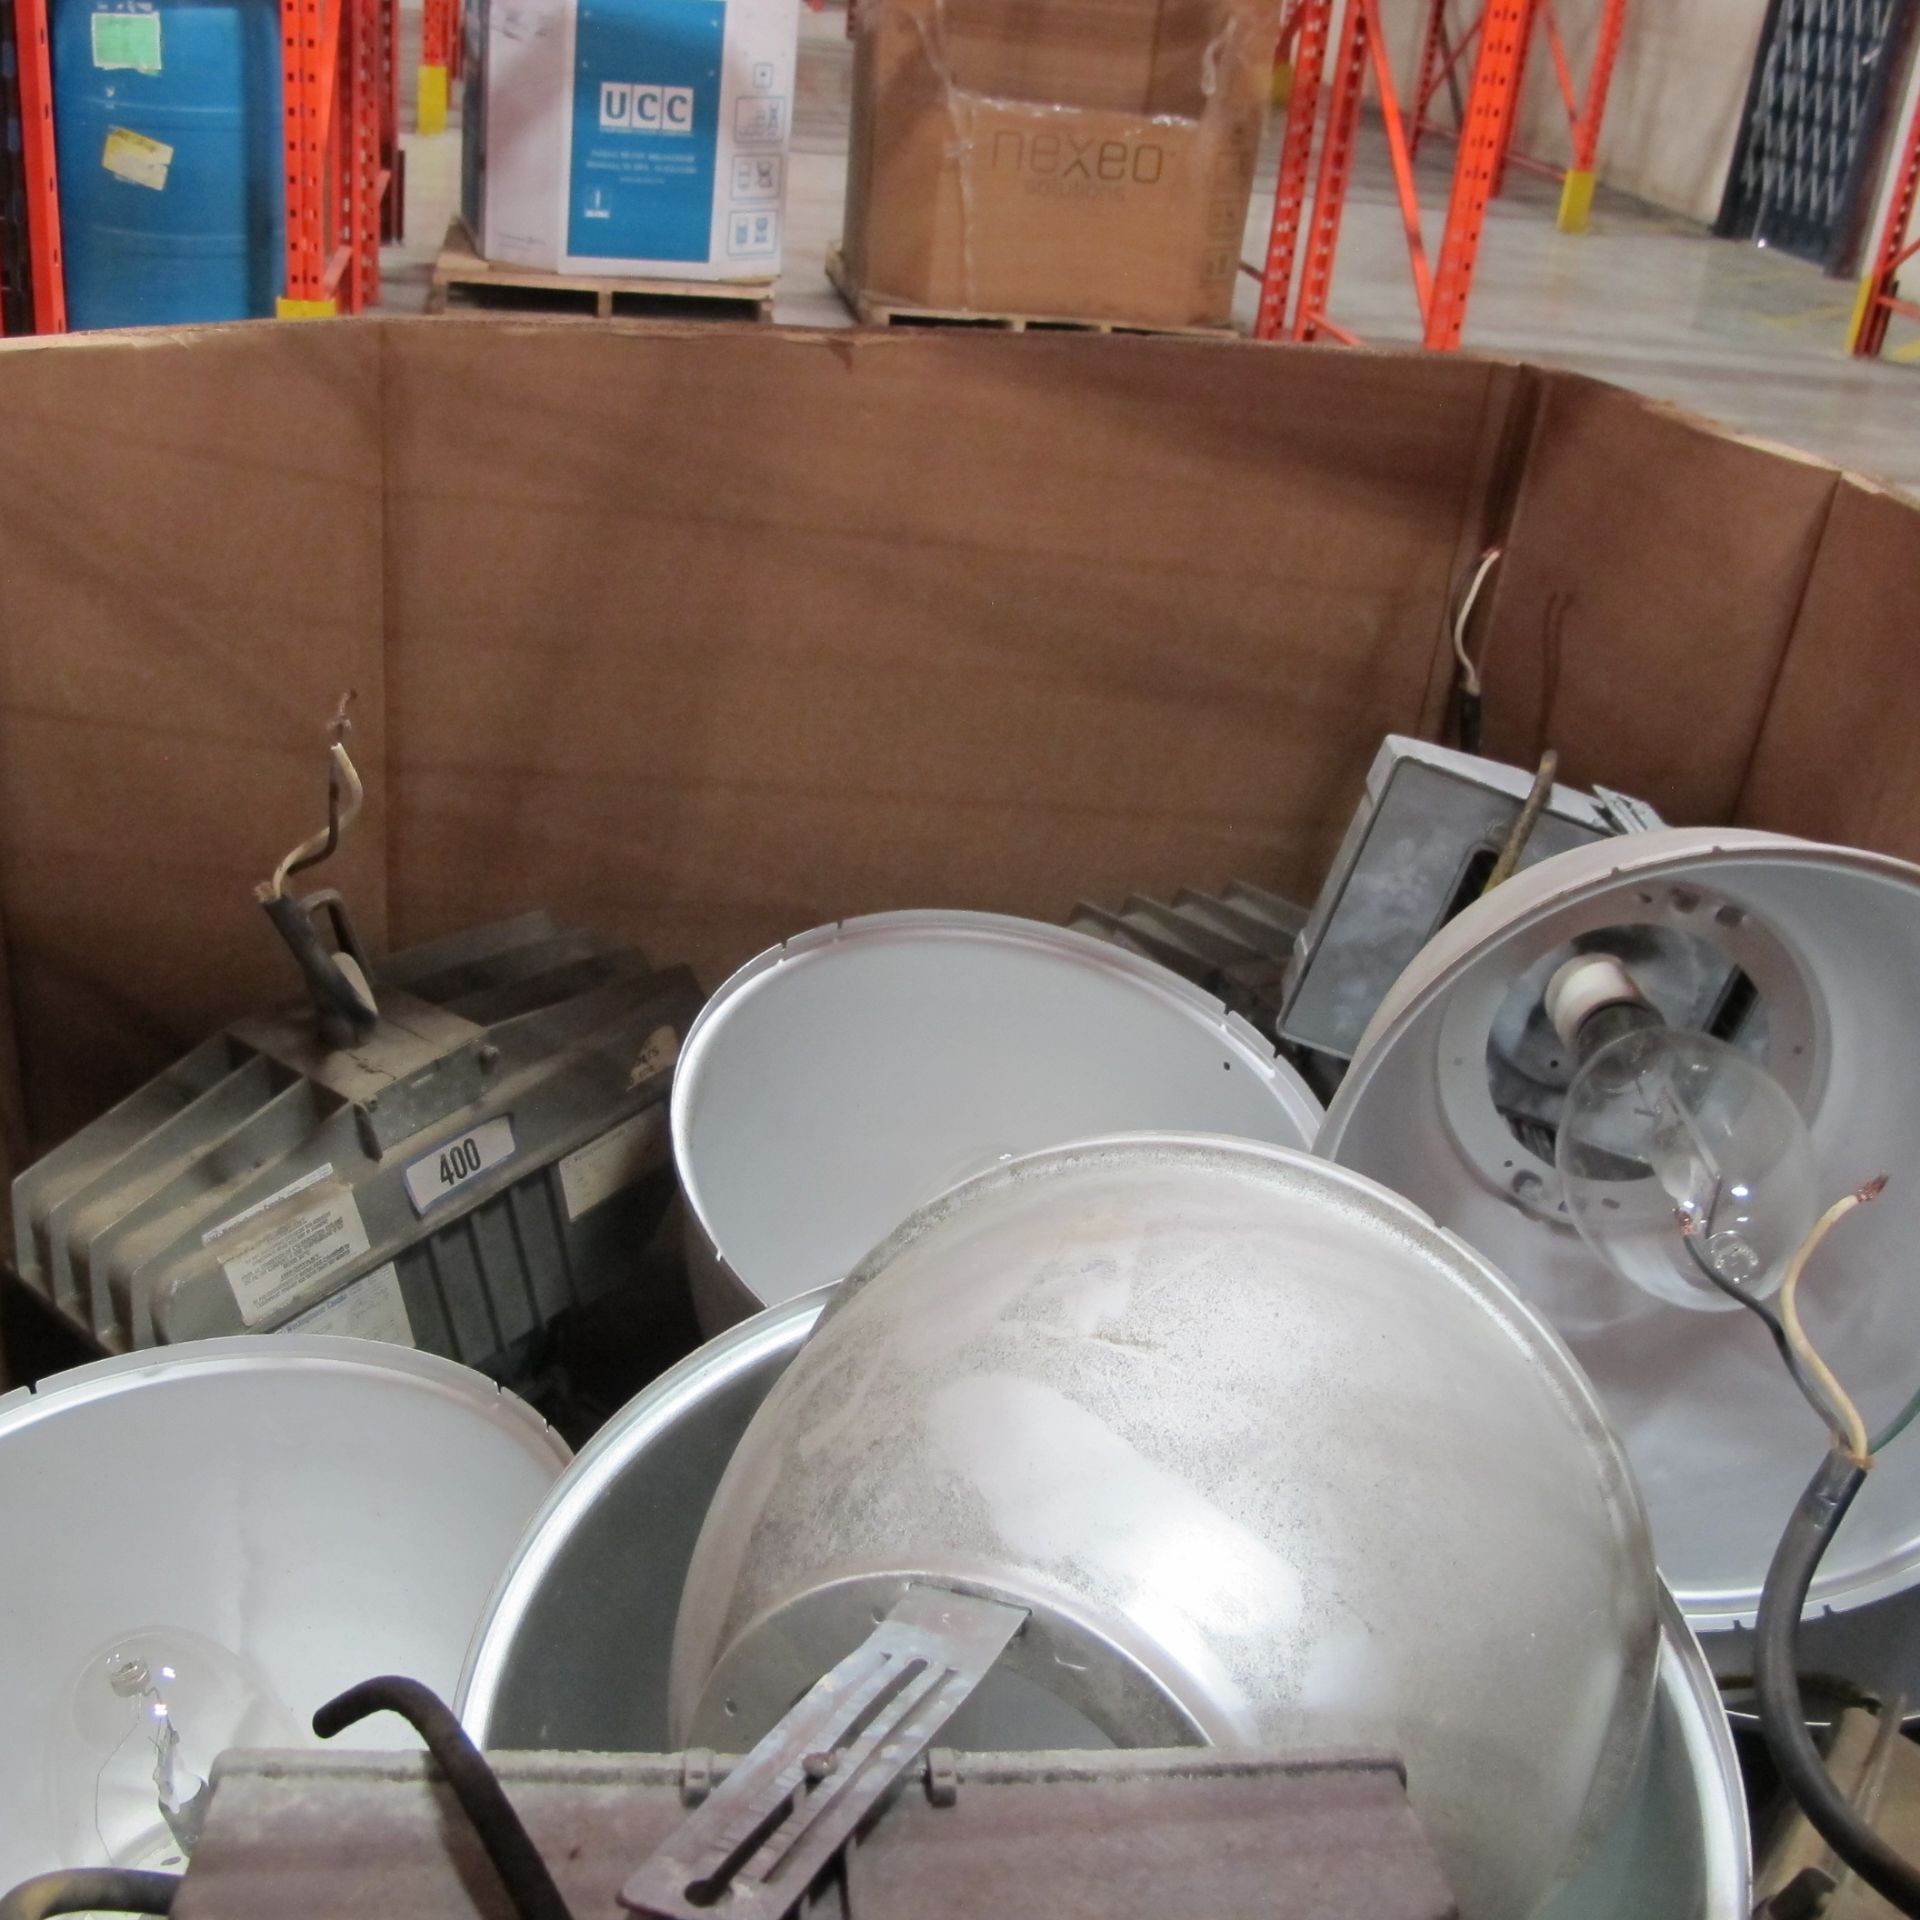 LOT OF (10) TOTES WITH WAREHOUSE LIGHTS - IN WAREHOUSE - Image 3 of 4